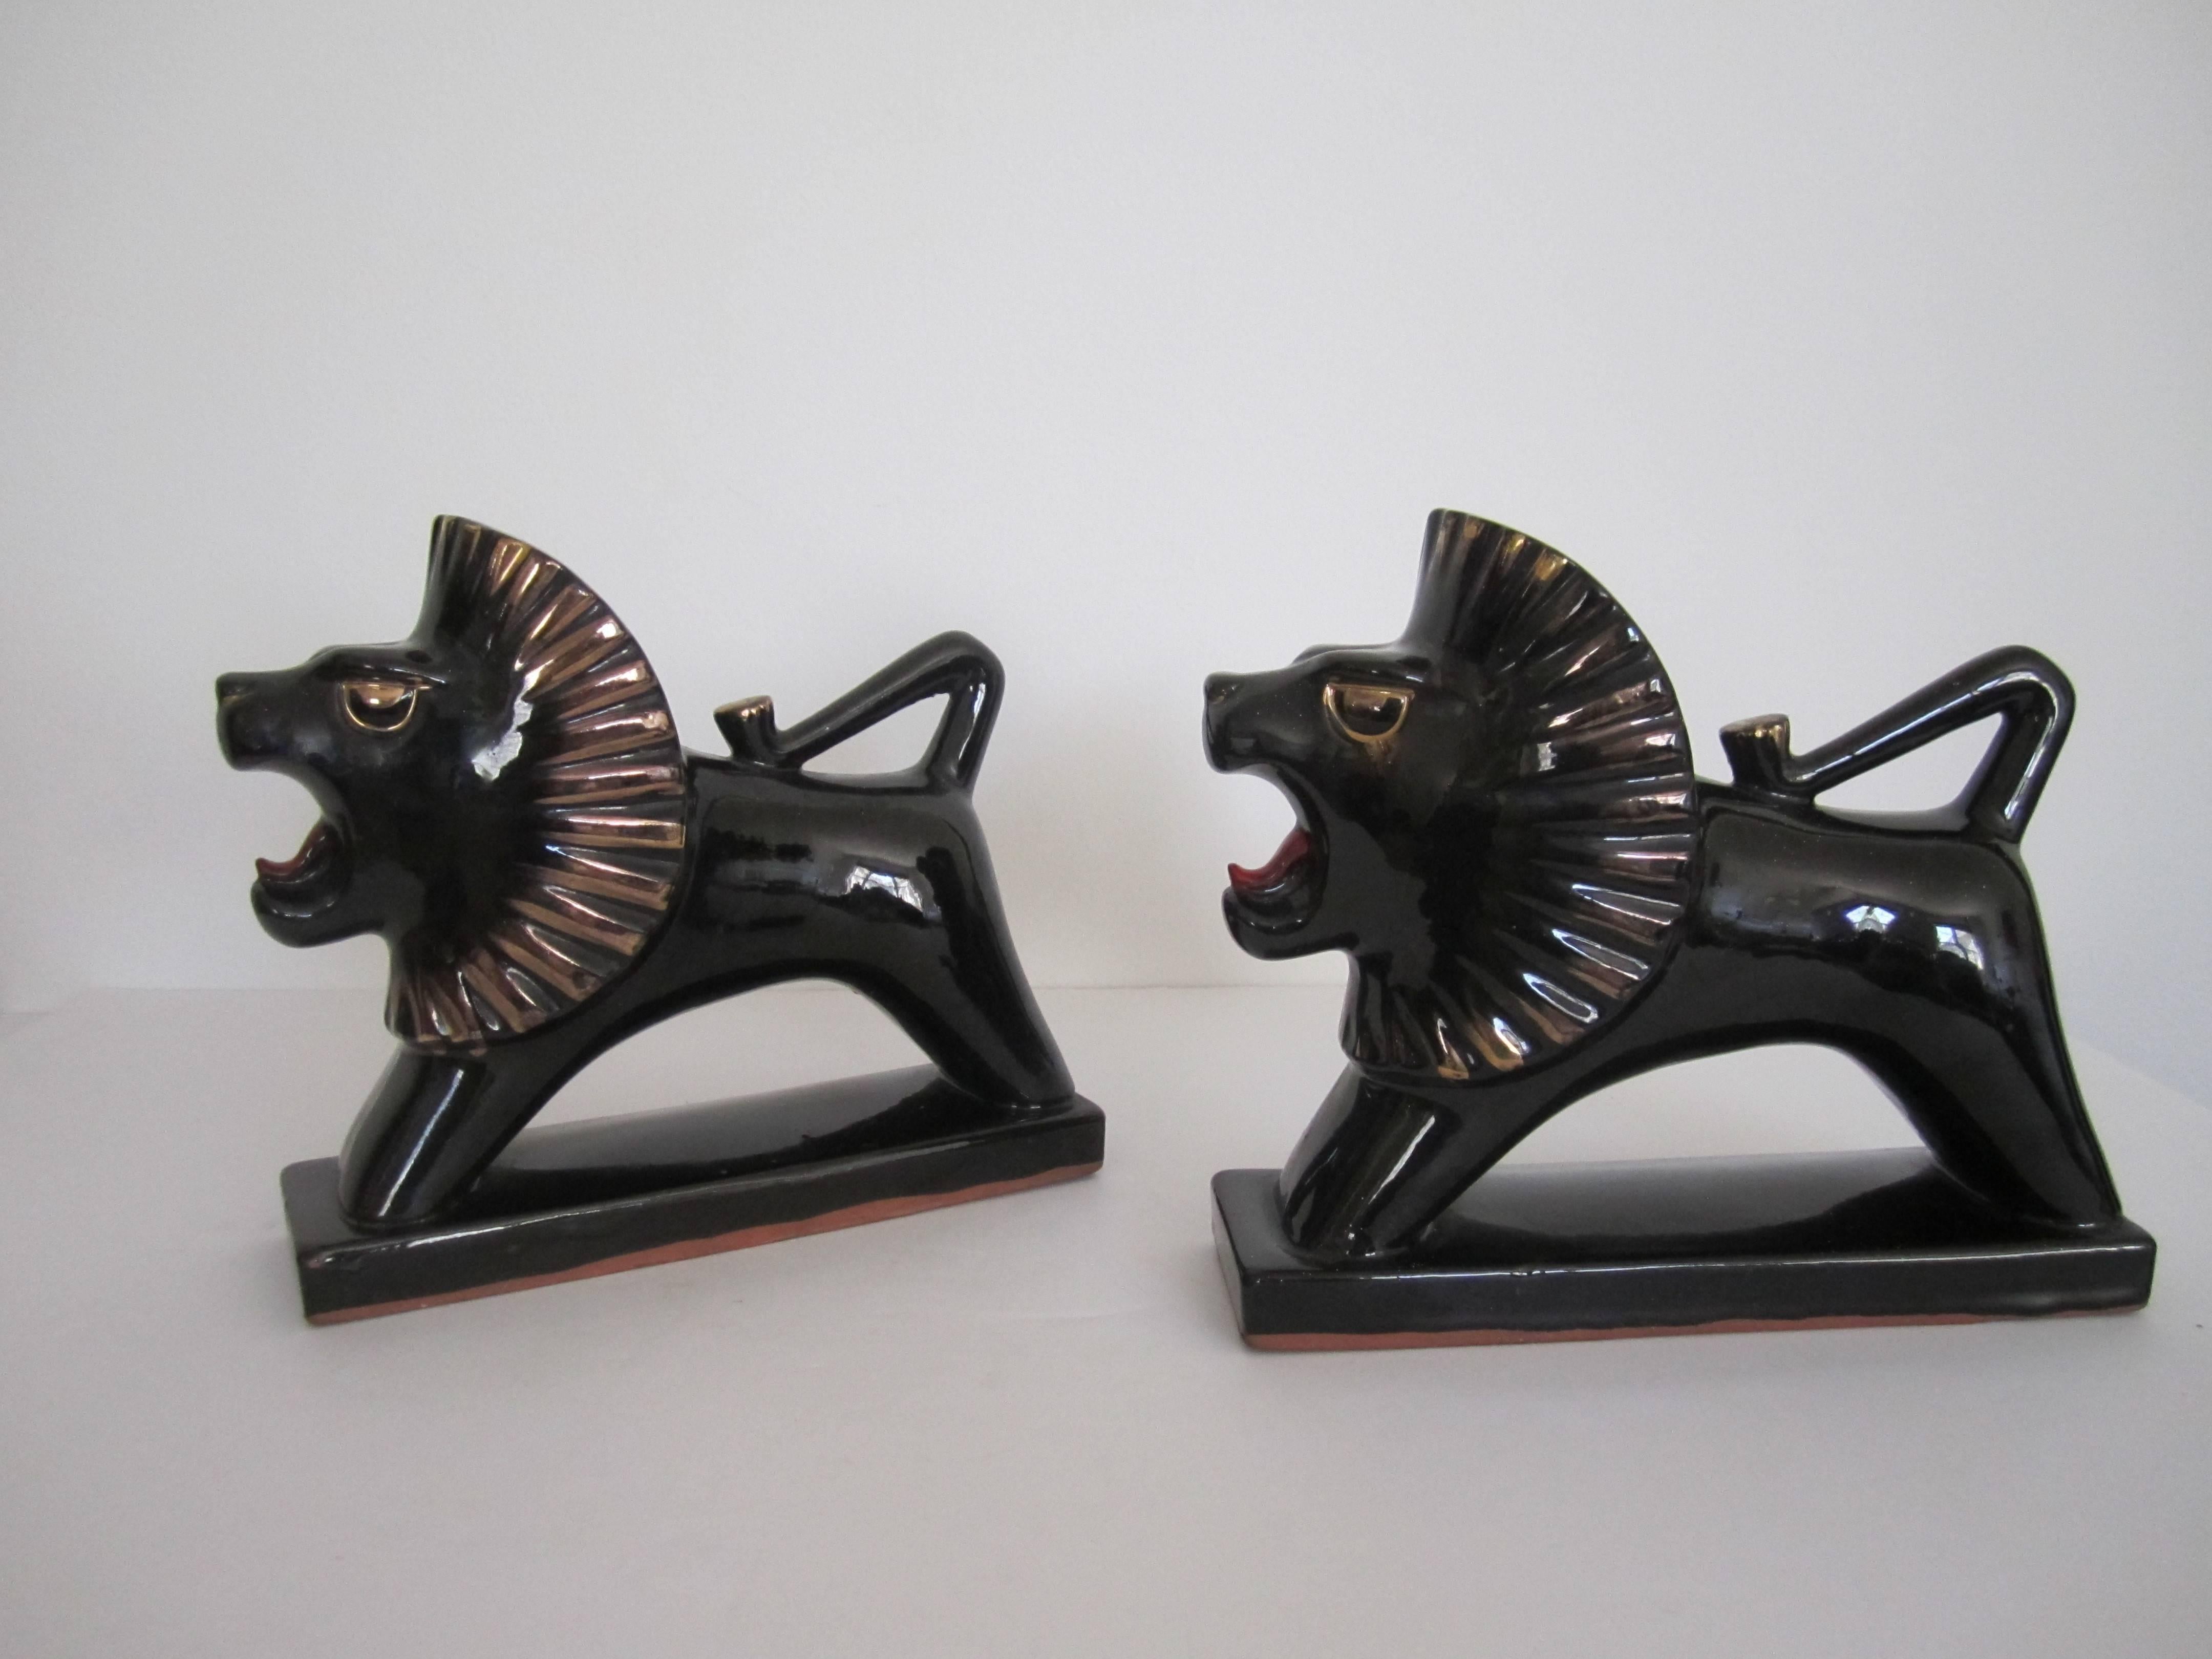 20th Century Art Deco Black and Gold Lion Bookends or Decorative Objects, Pair